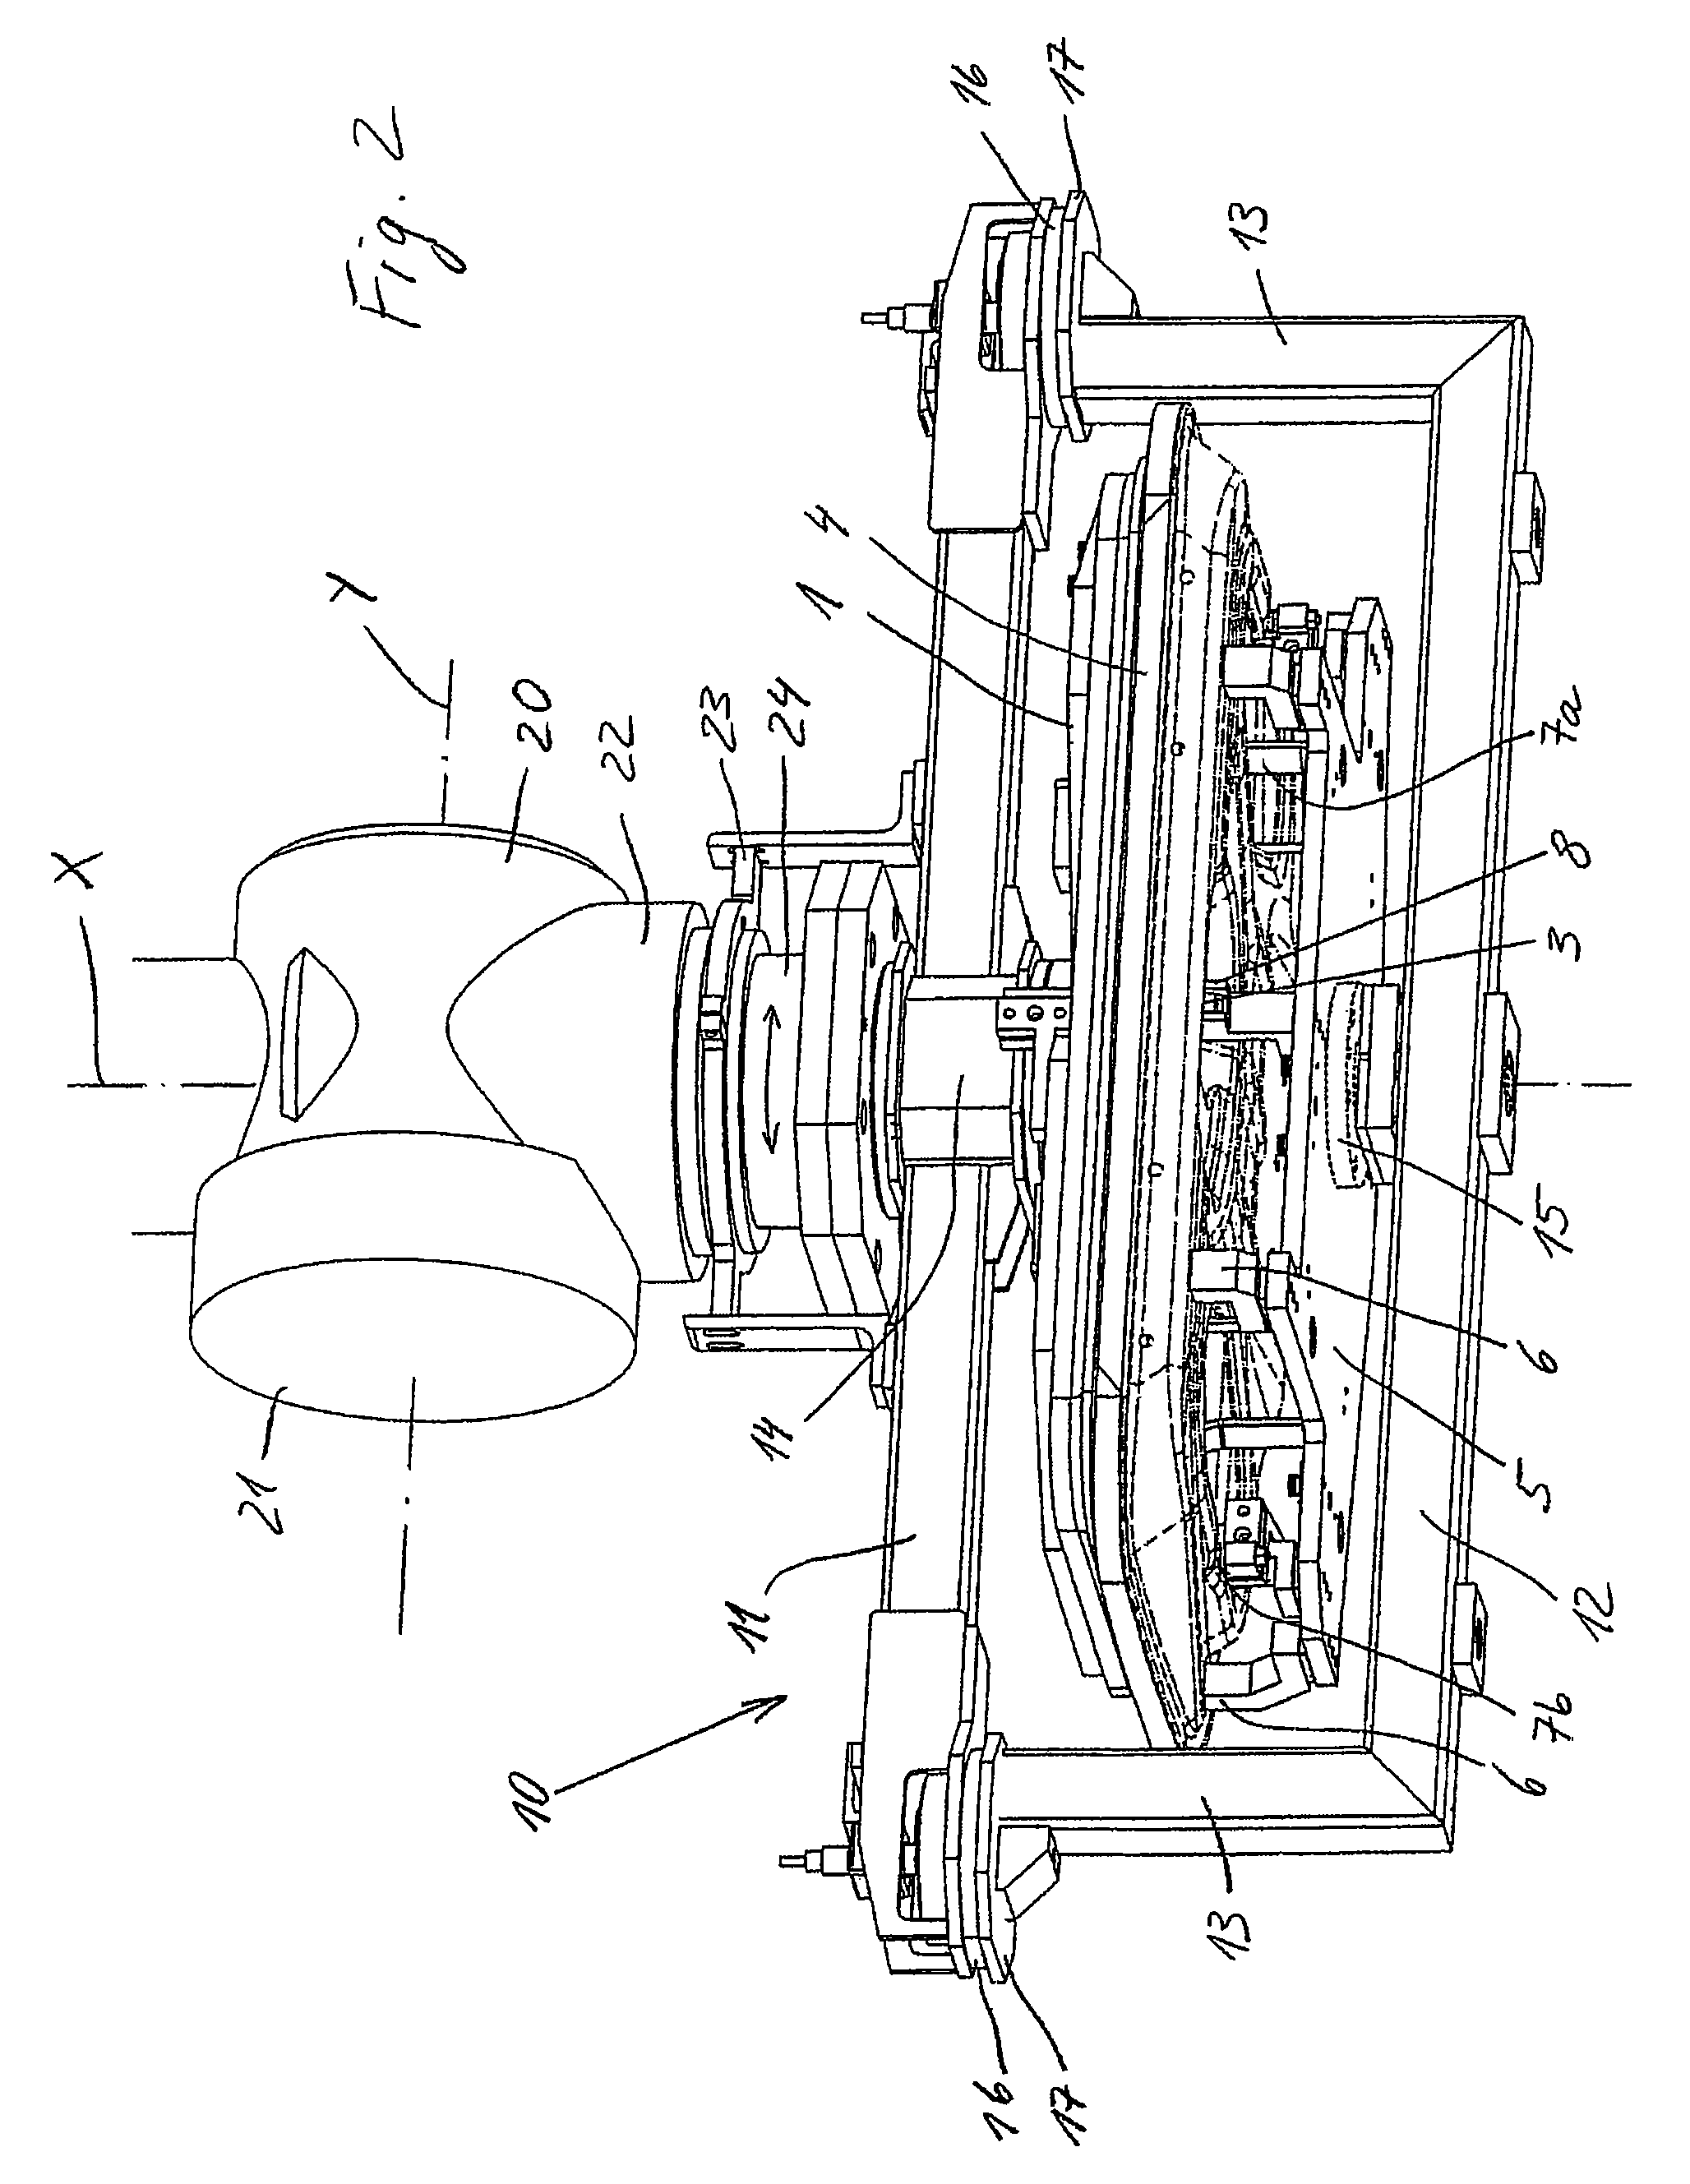 Clamping device for holding and clamping components